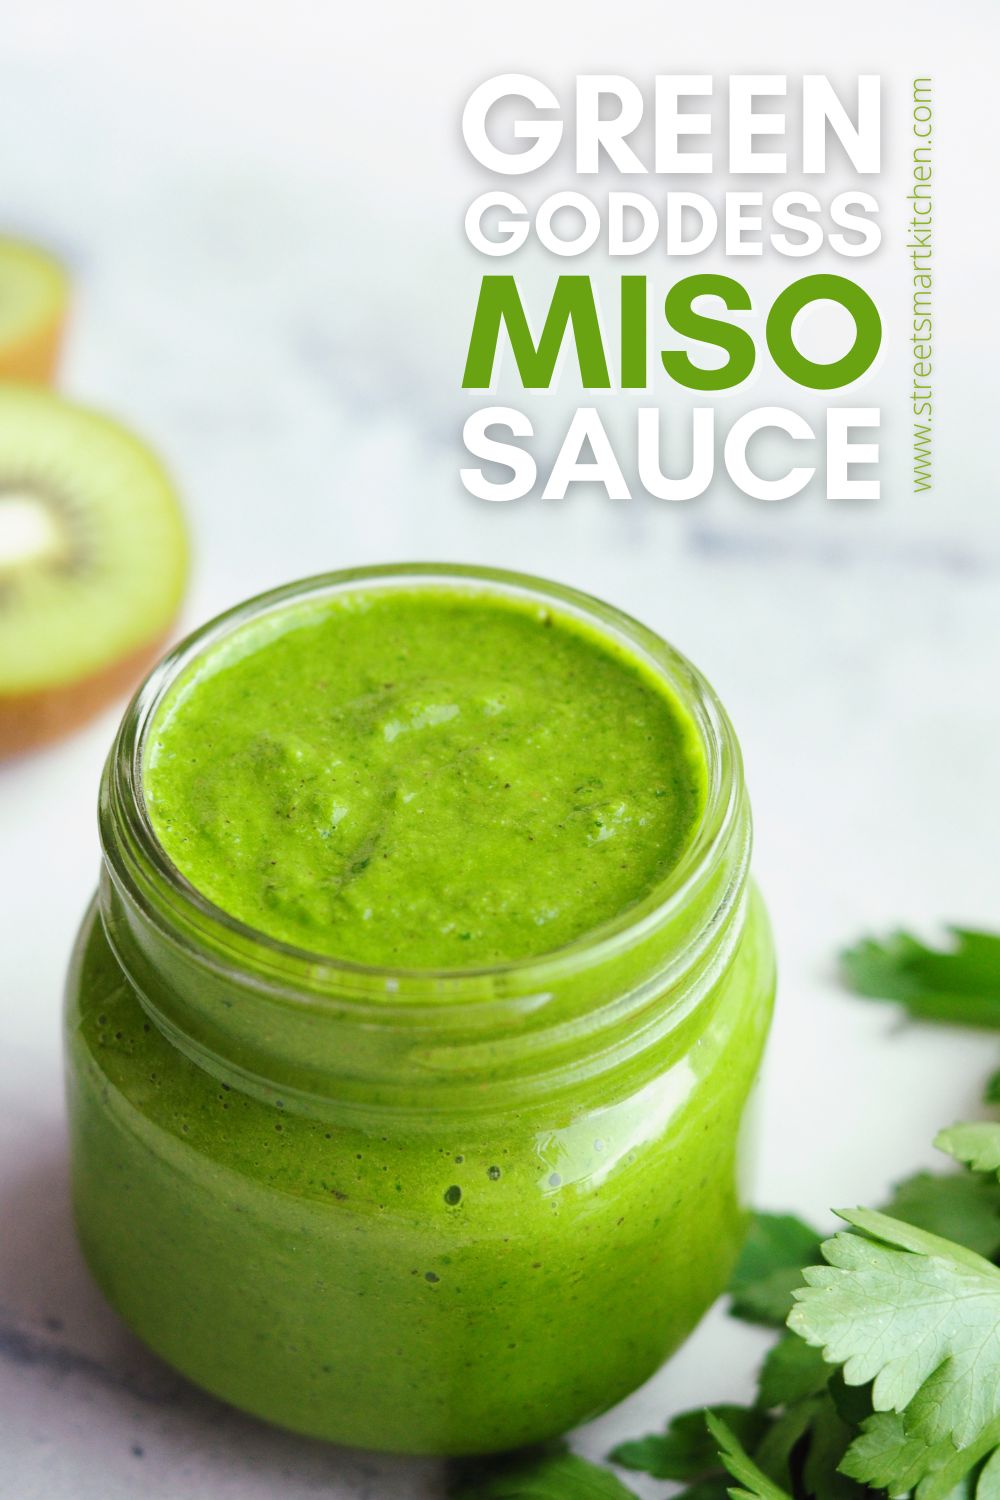 This green goddess miso sauce is light, flavorful, and refreshing. All you need are 7 ingredients and 5 minutes. Enjoy it on salads, seafood, and bowls.